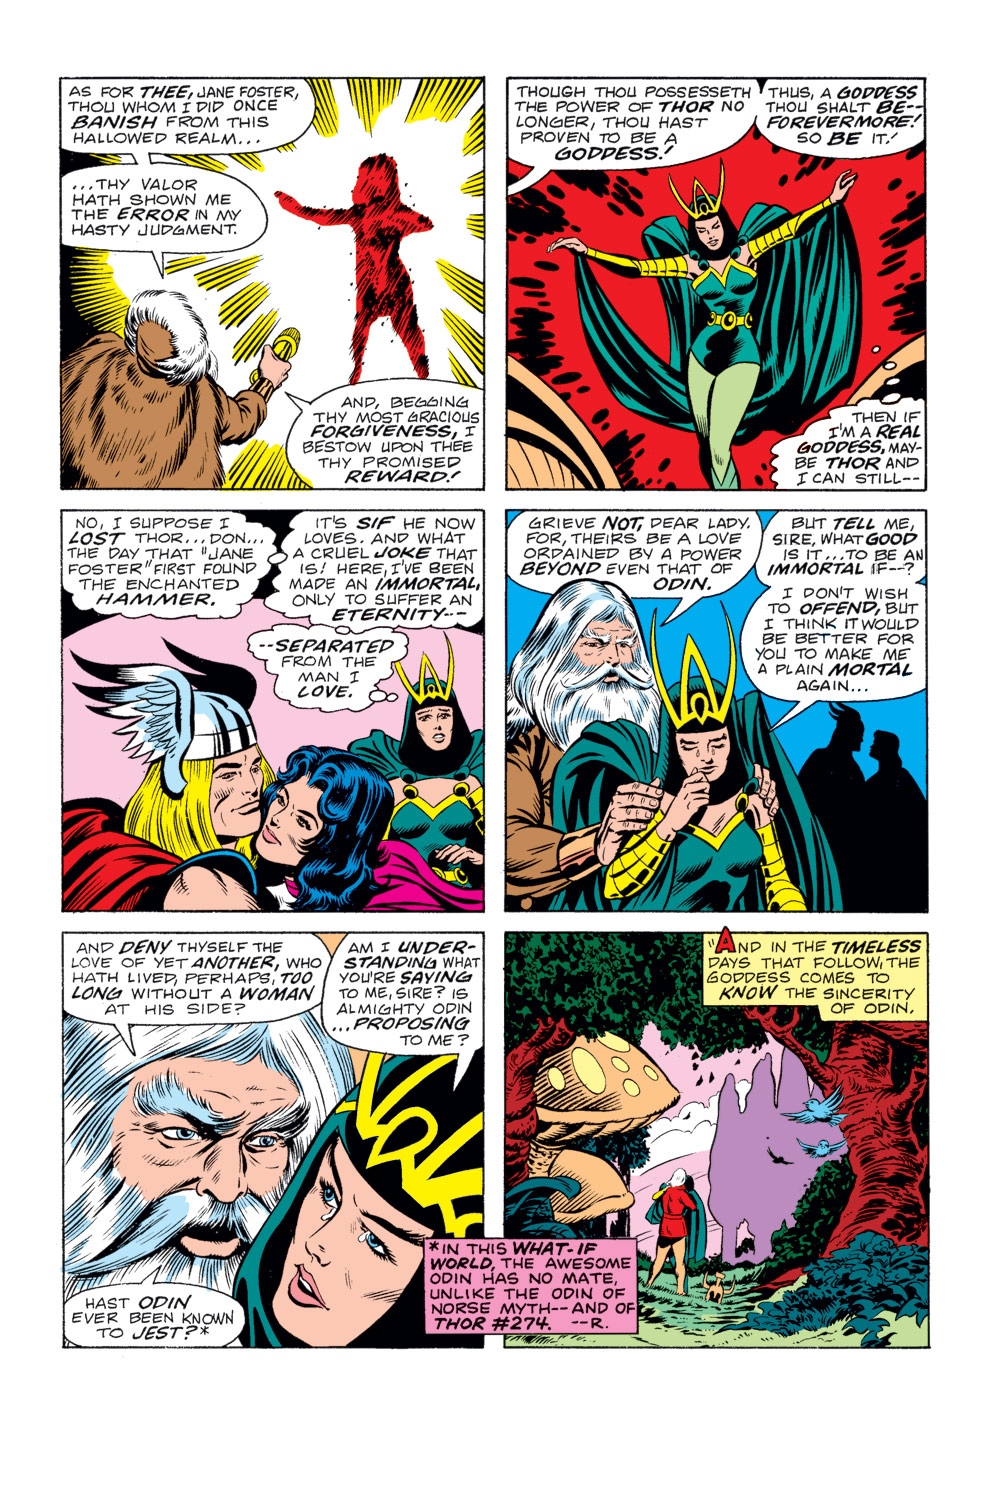 What If? (1977) issue 10 - Jane Foster had found the hammer of Thor - Page 33